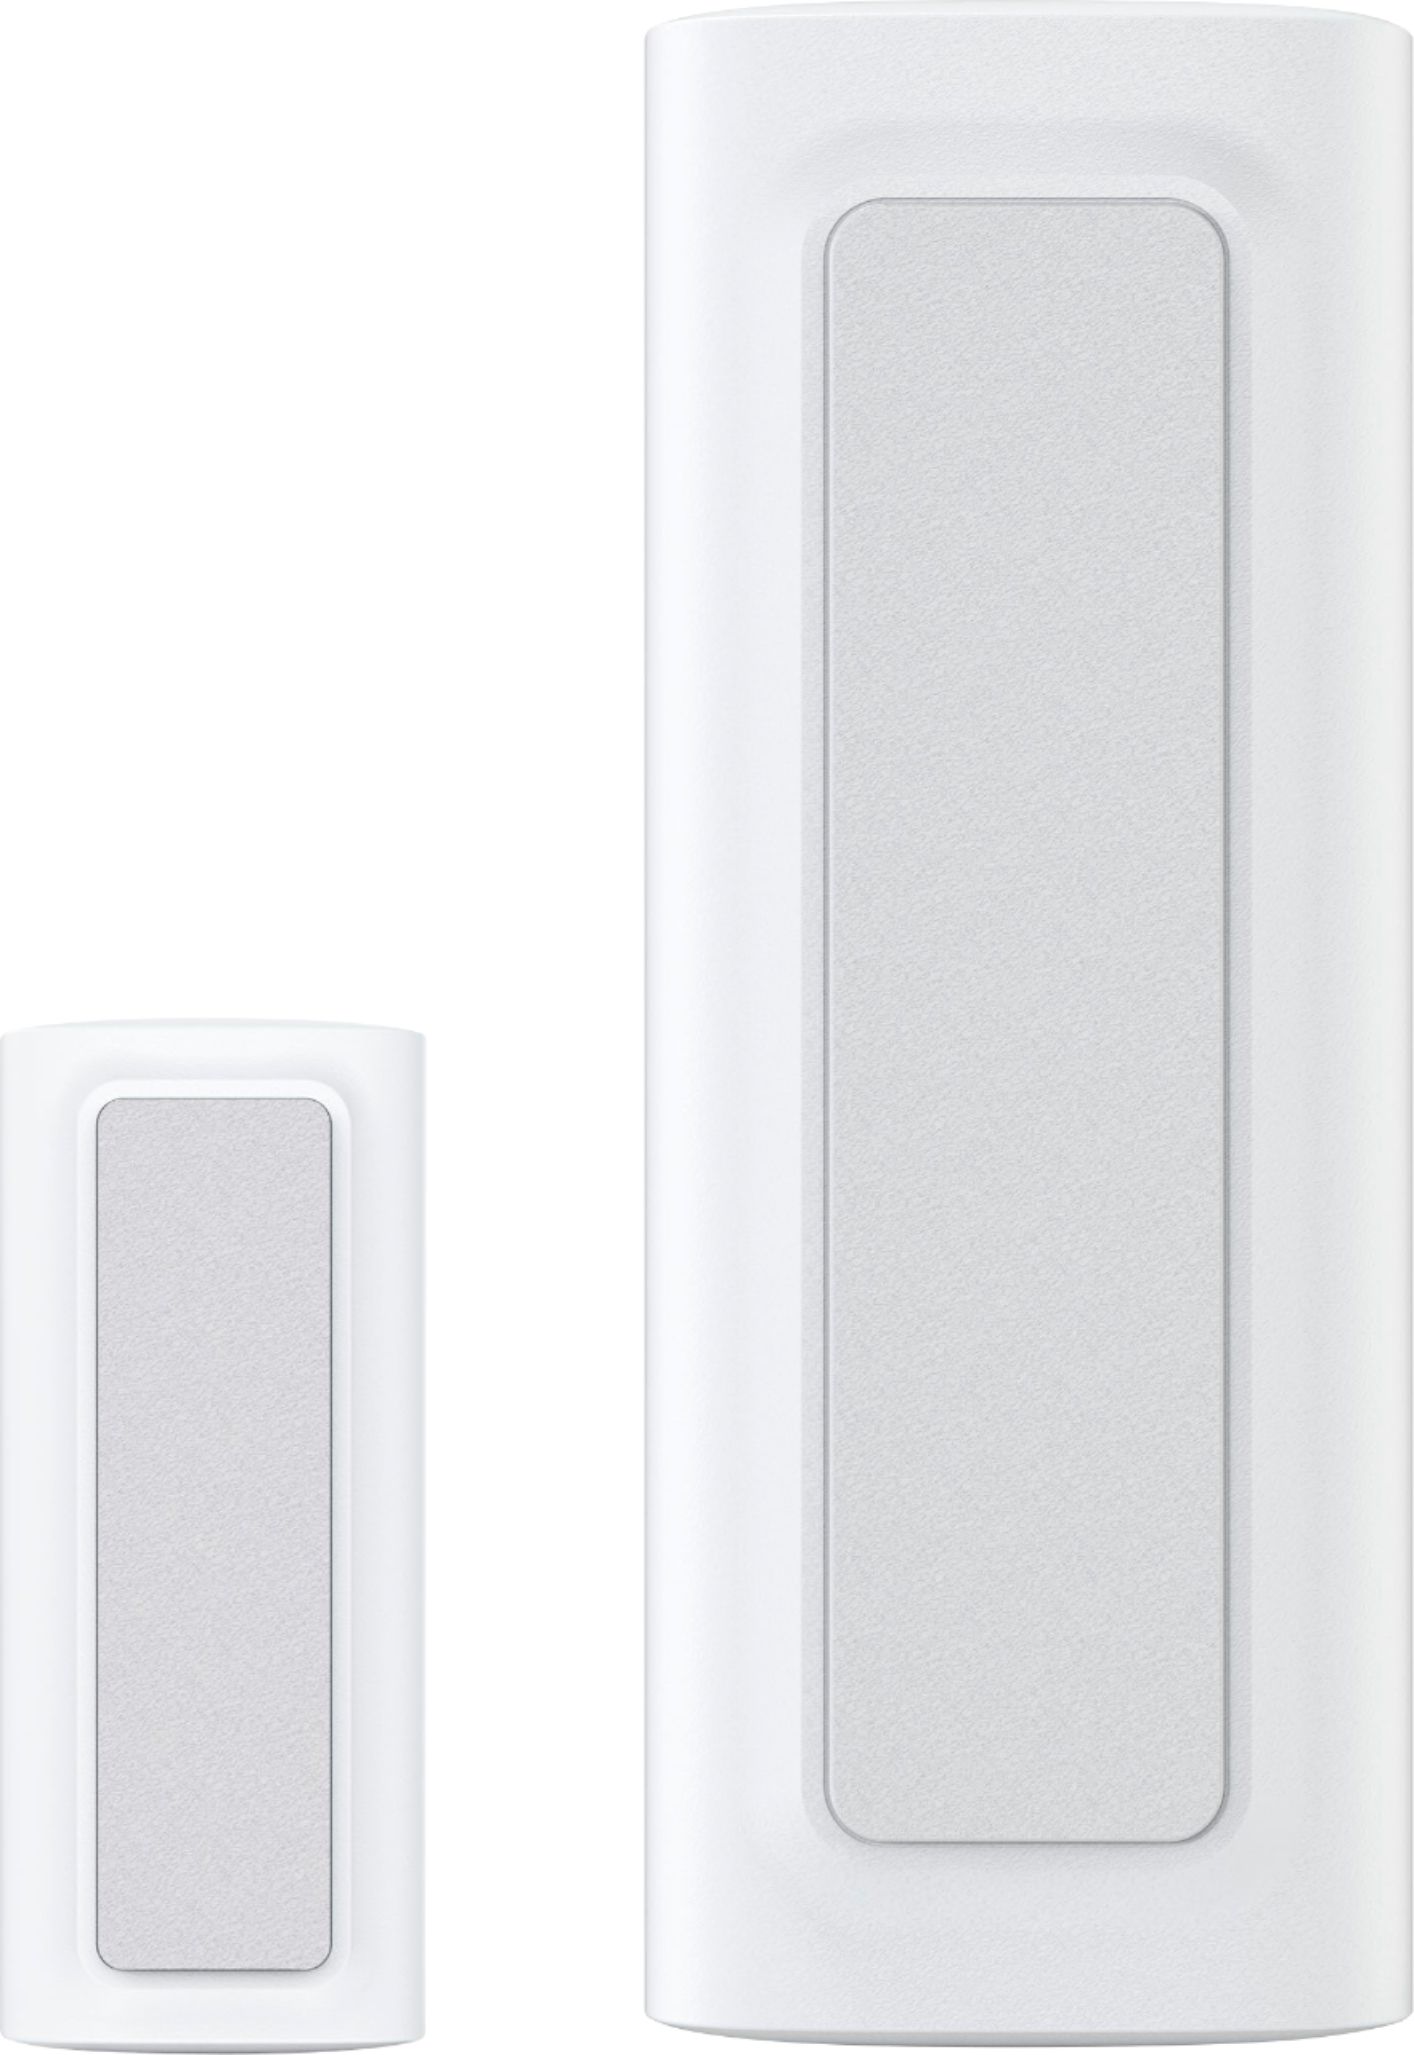 Angle View: eufy Security - Smart Home Security Alarm Motion Sensor Add-on - White